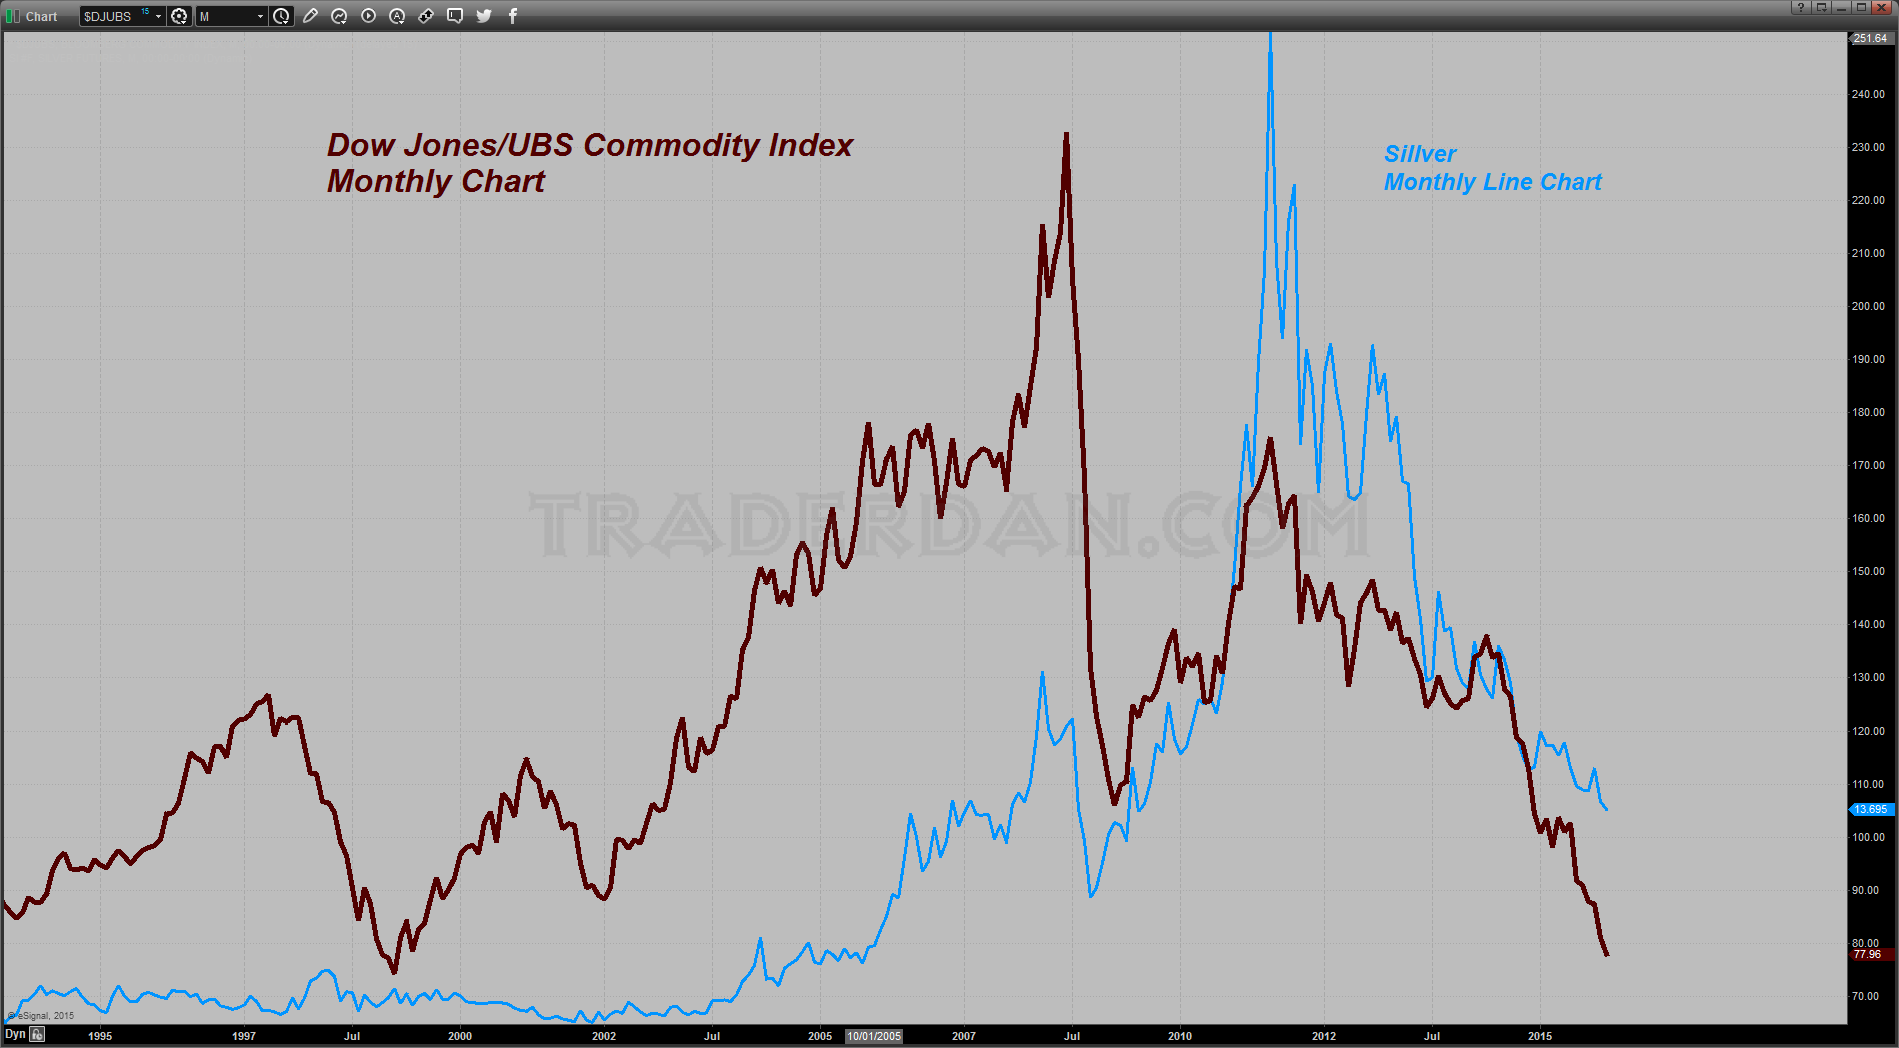 DJ Commodity Index vs Silver Monthly 1993-2015